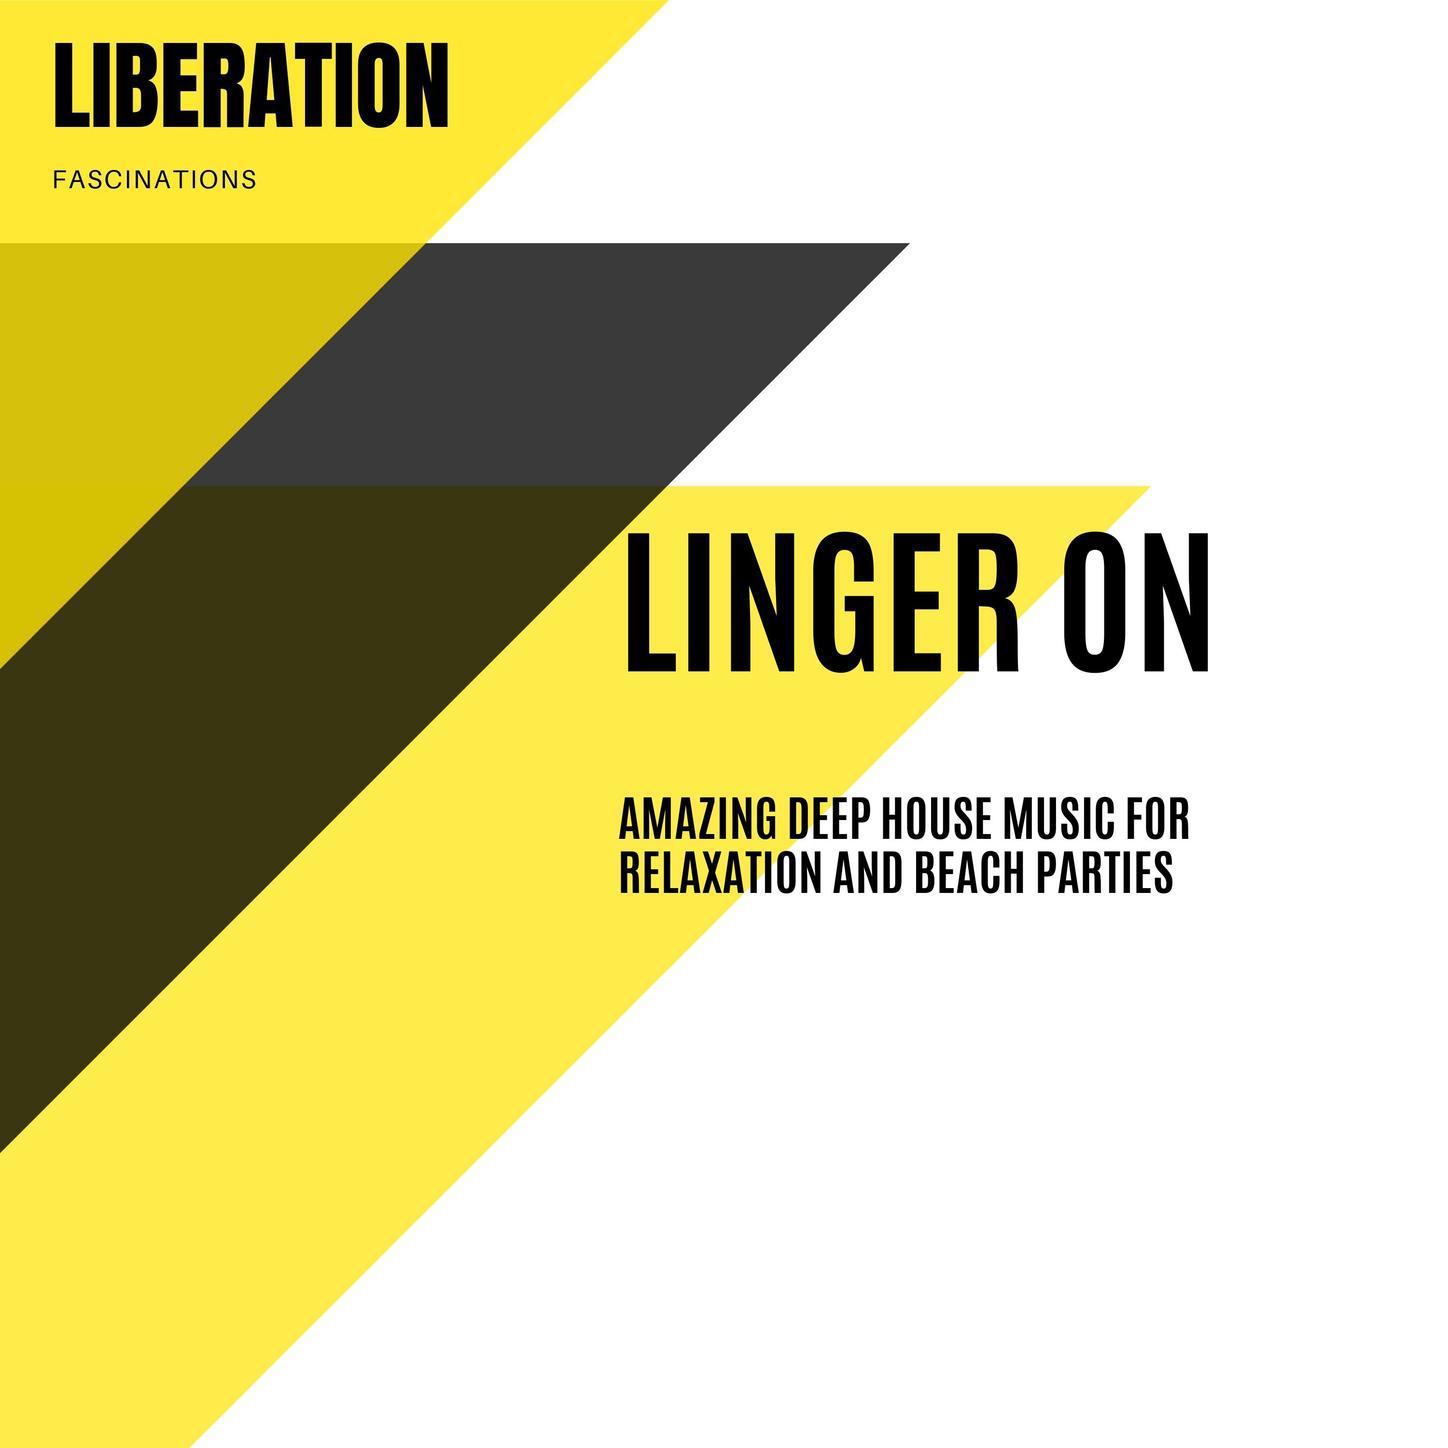 Linger On: Amazing Deep House Music for Relaxation and Beach Parties